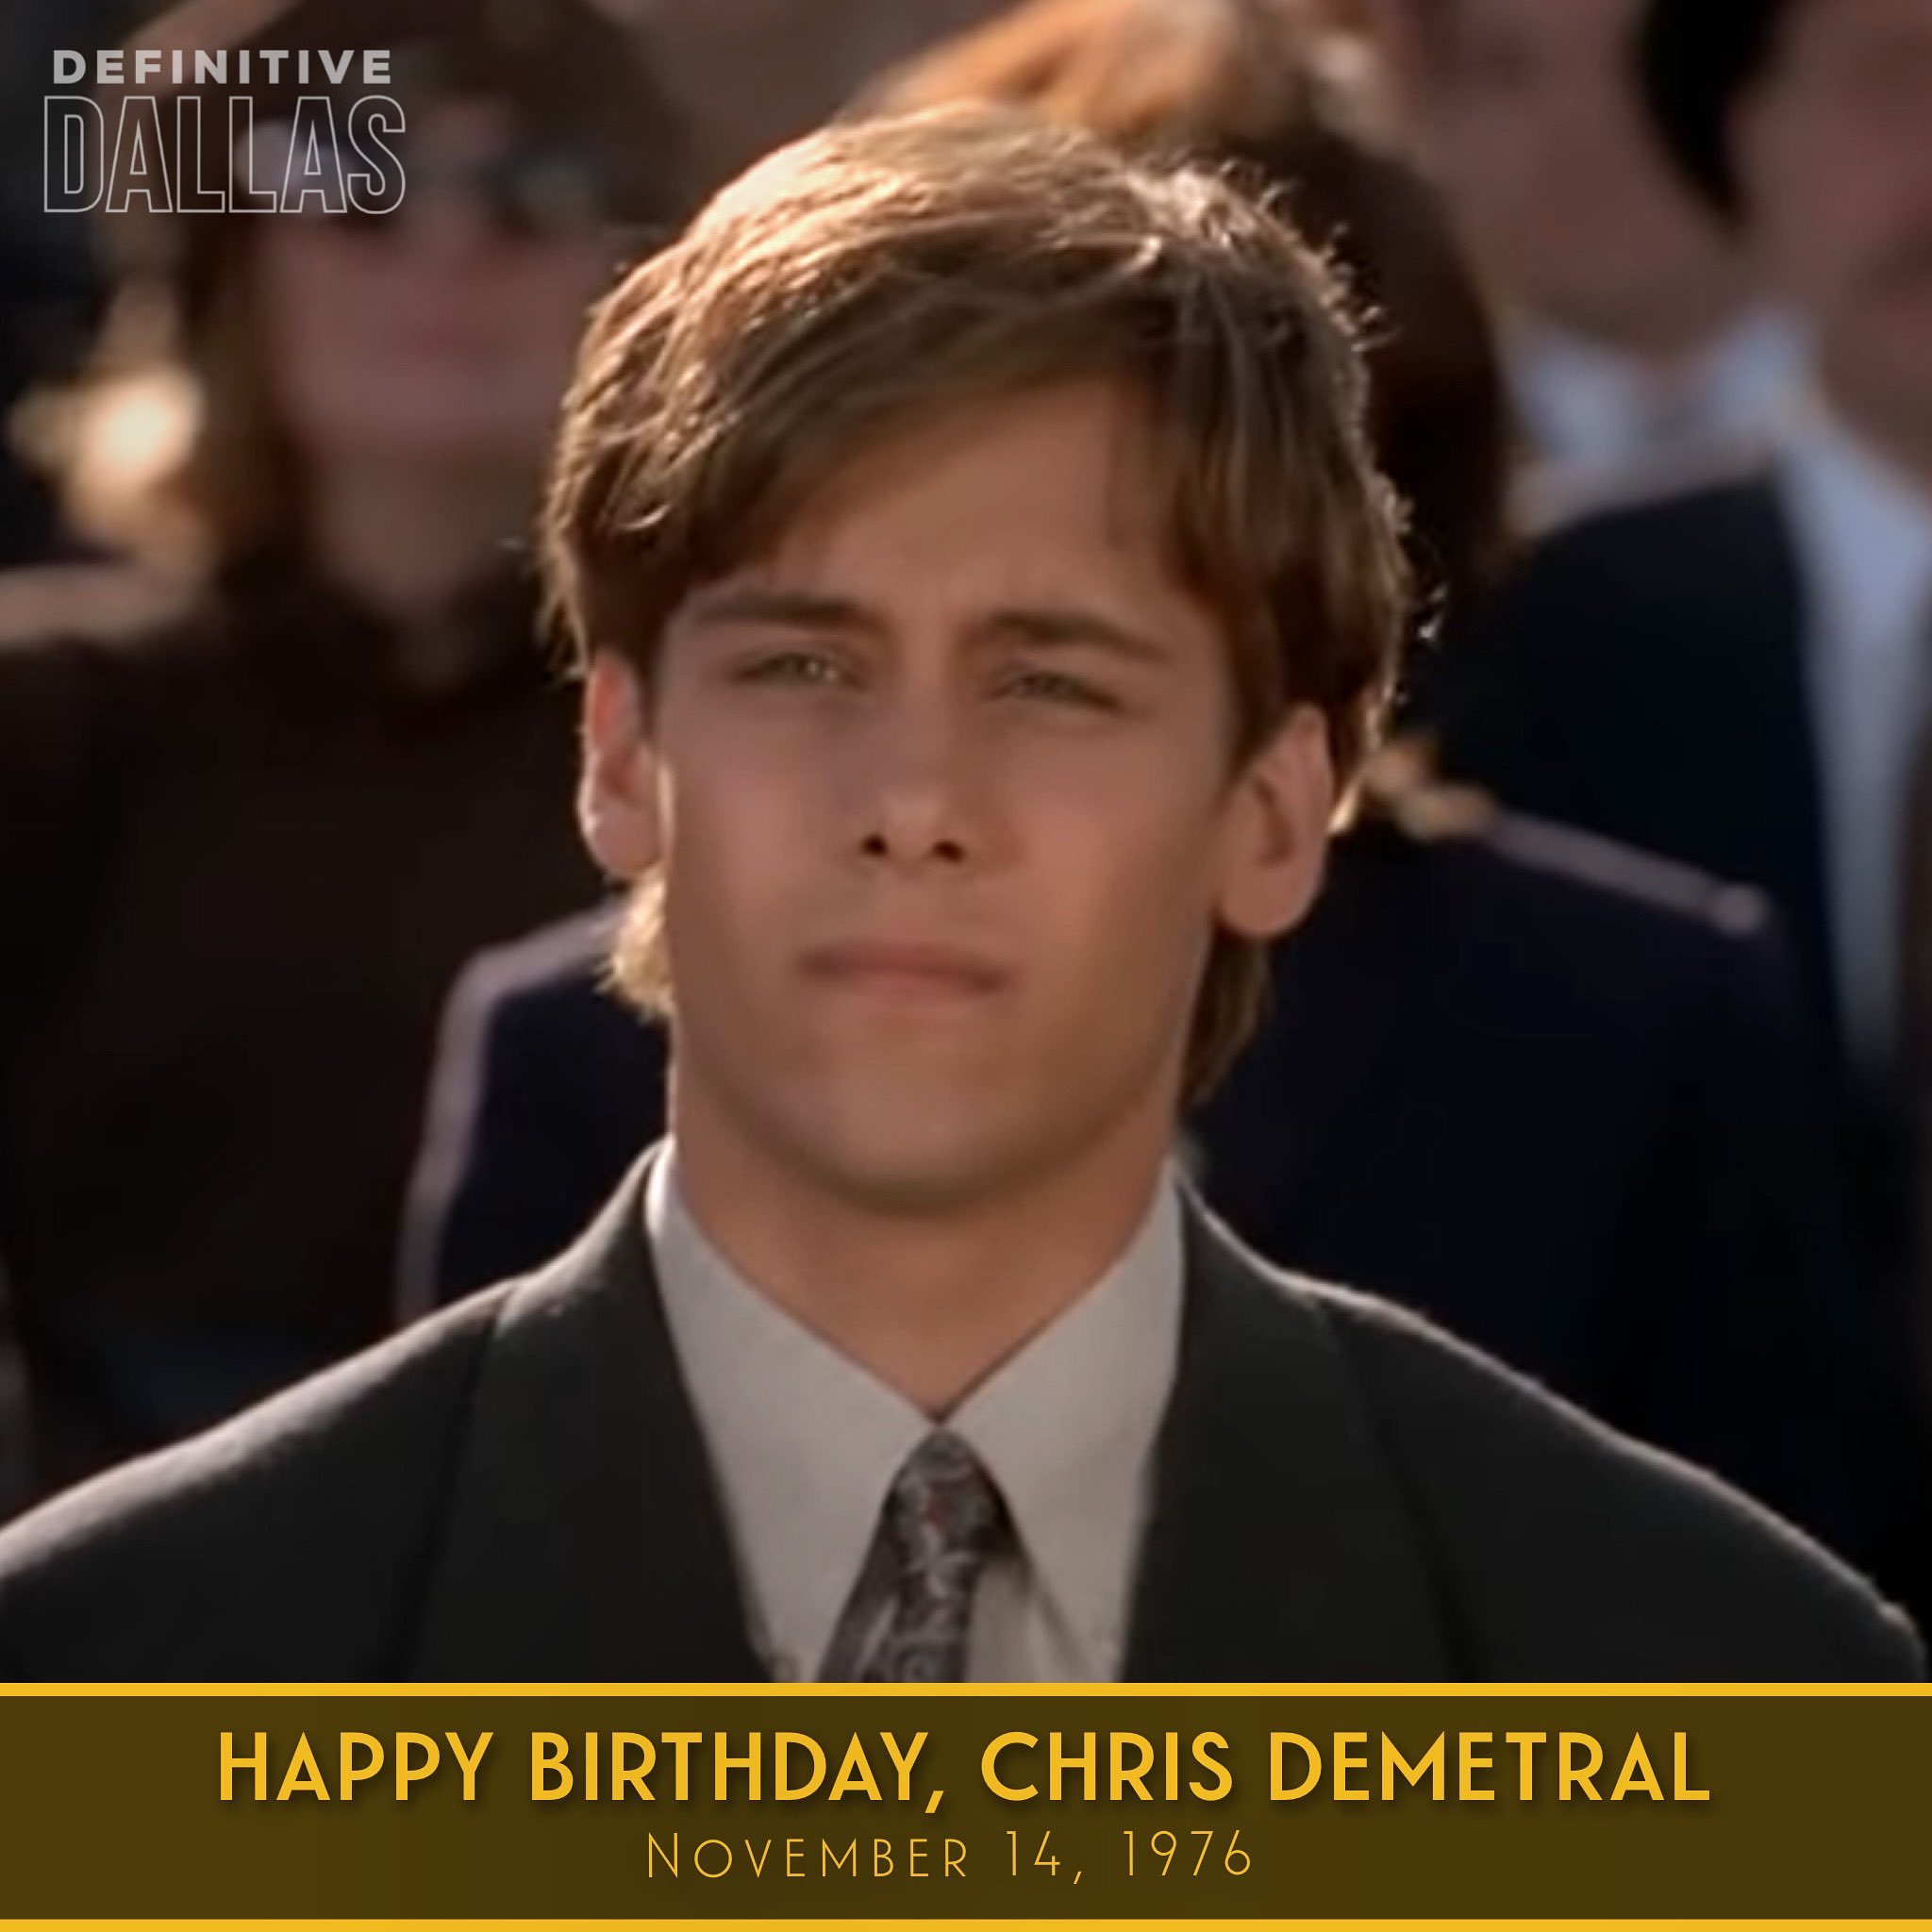 Happy 45th birthday to Chris Demetral. He played the part of Christopher Ewing in Dallas: J.R. Returns. 